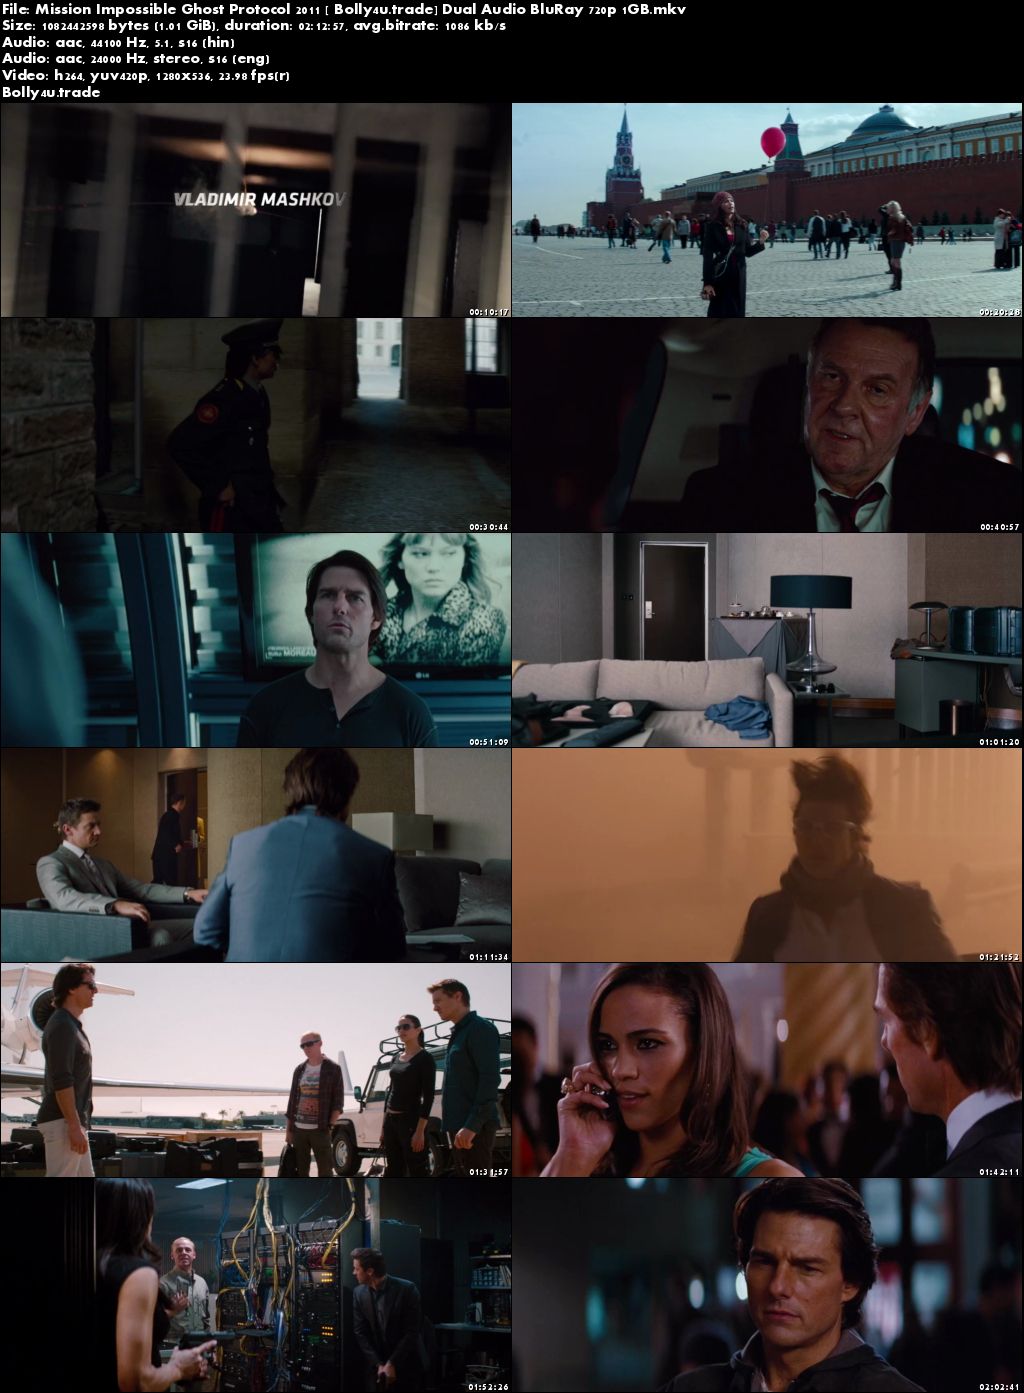 Mission Impossible Ghost Protocol 2011 BRRip 400MB Hindi Dual Audio 480p Download